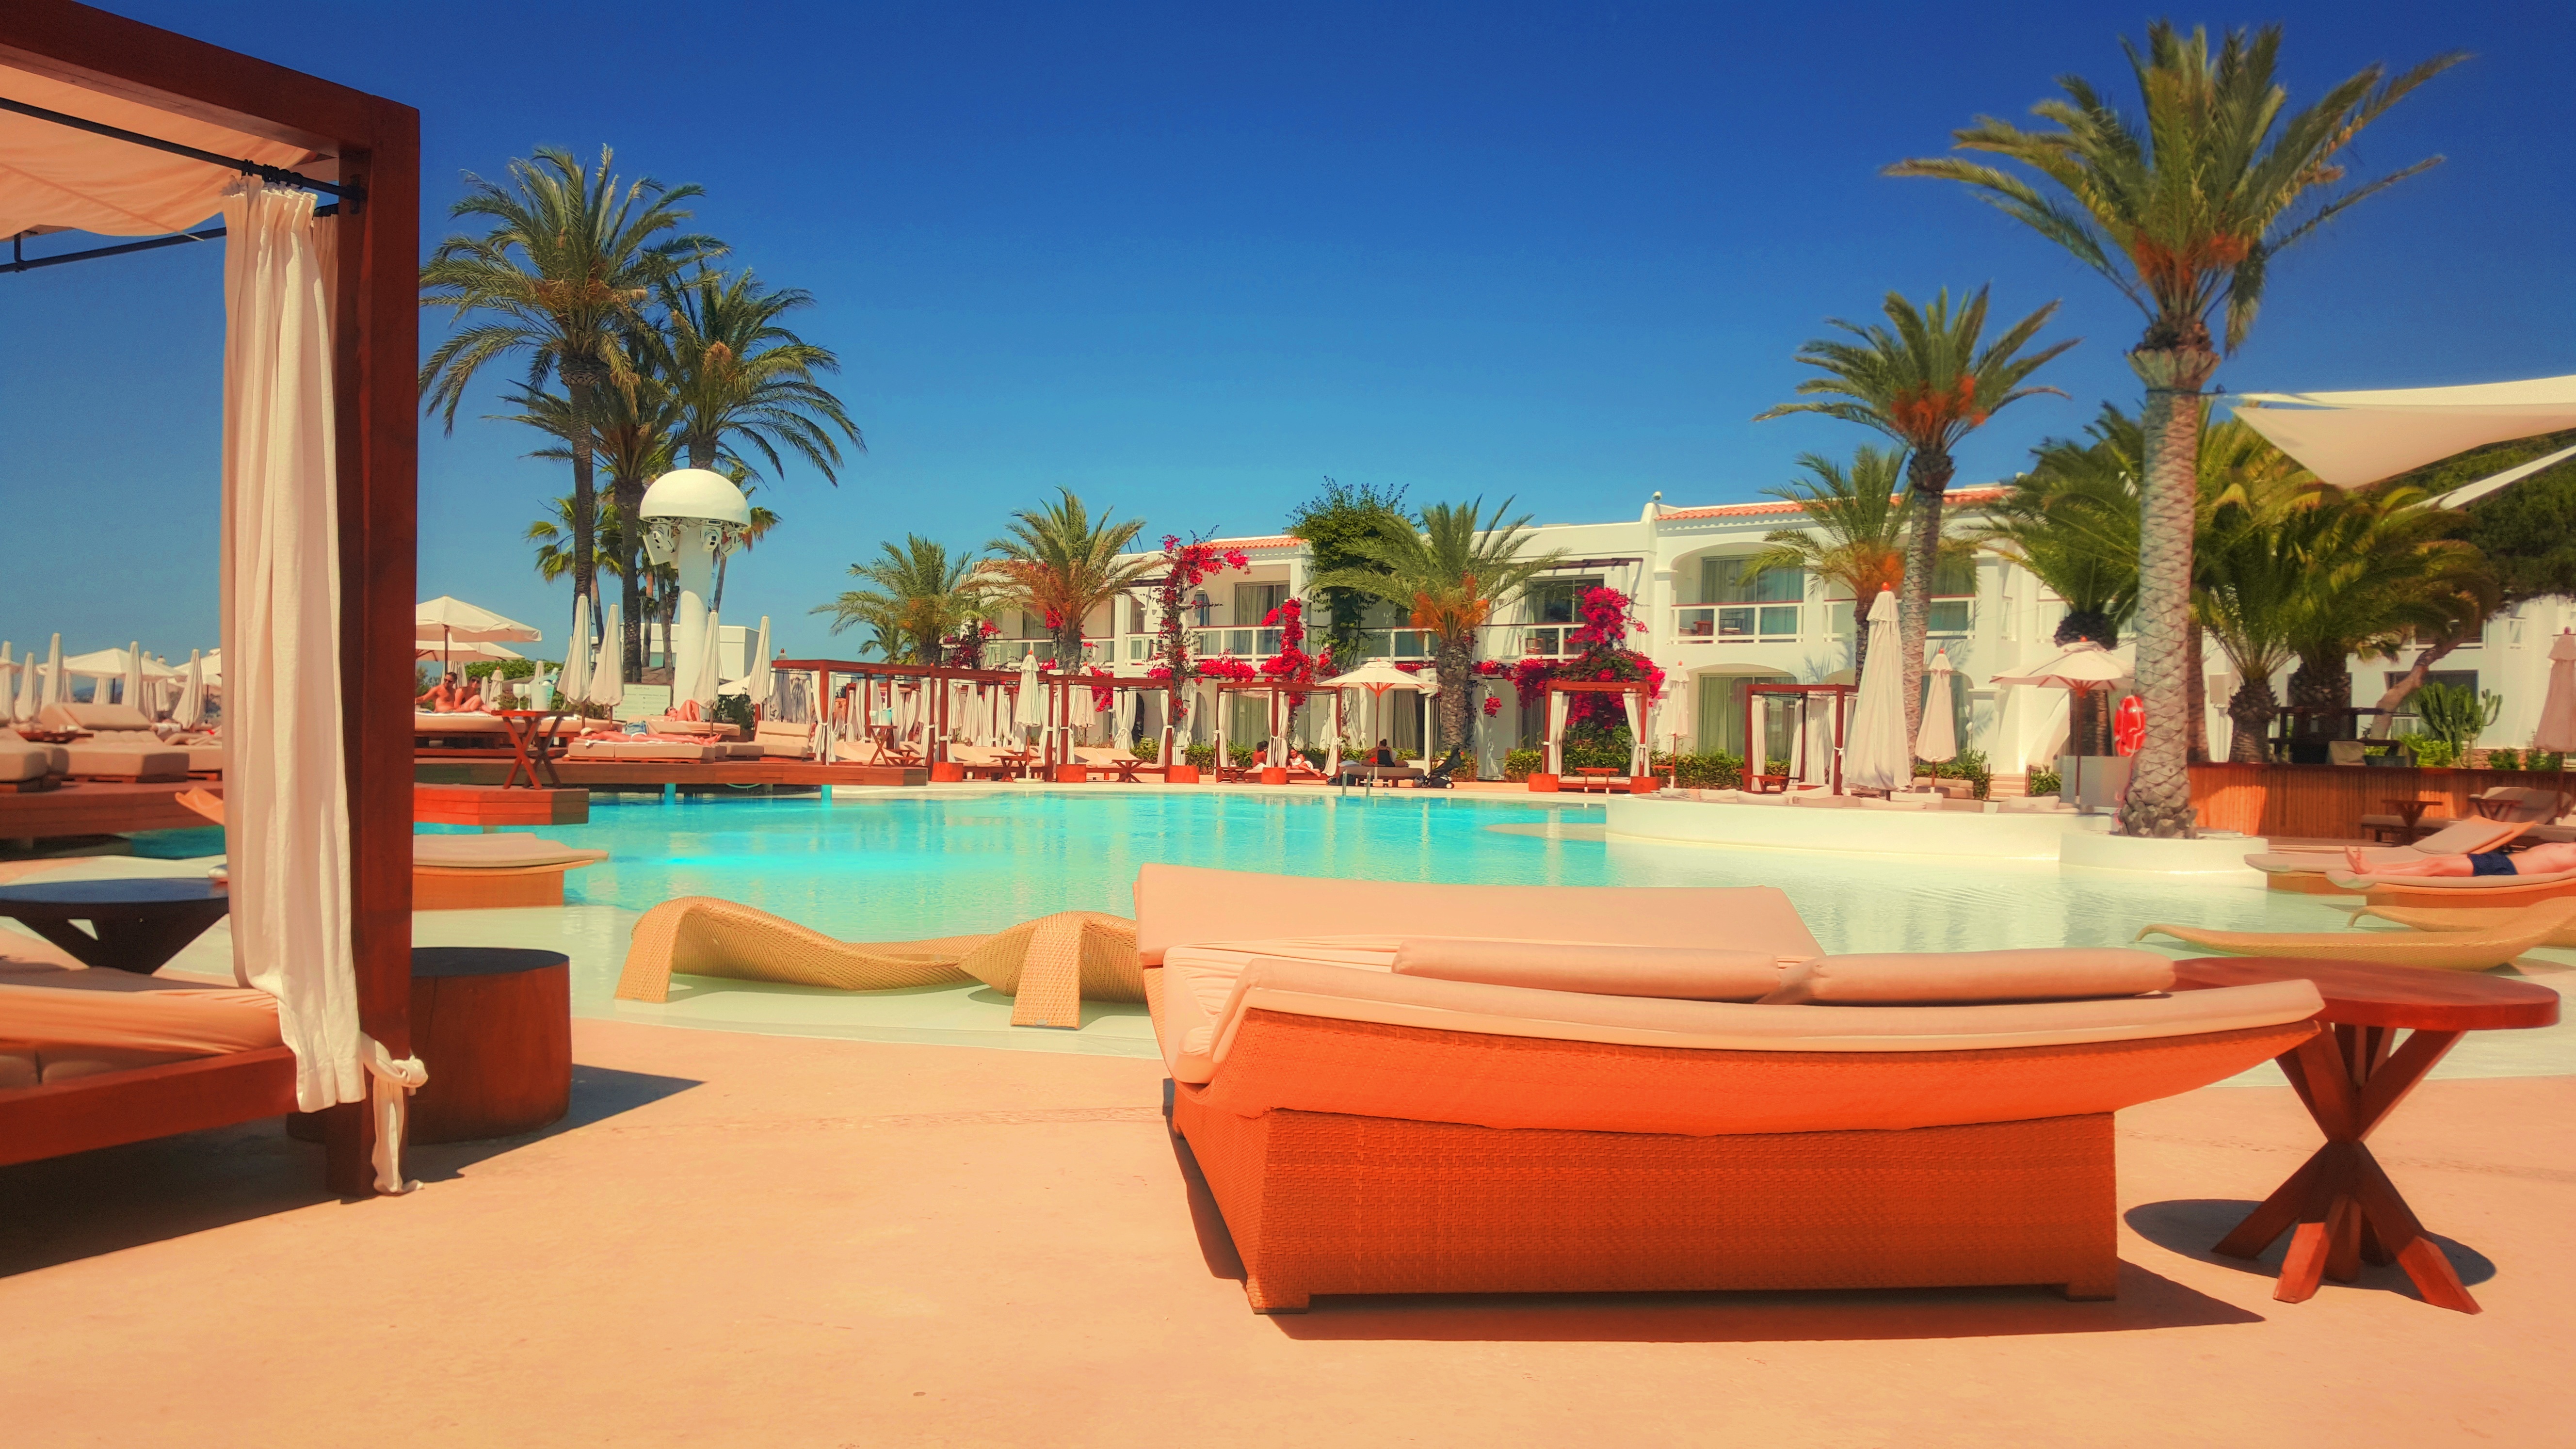 Full HD miscellaneous, palms, miscellanea, relaxation, rest, resort, pool, hotel, luxury